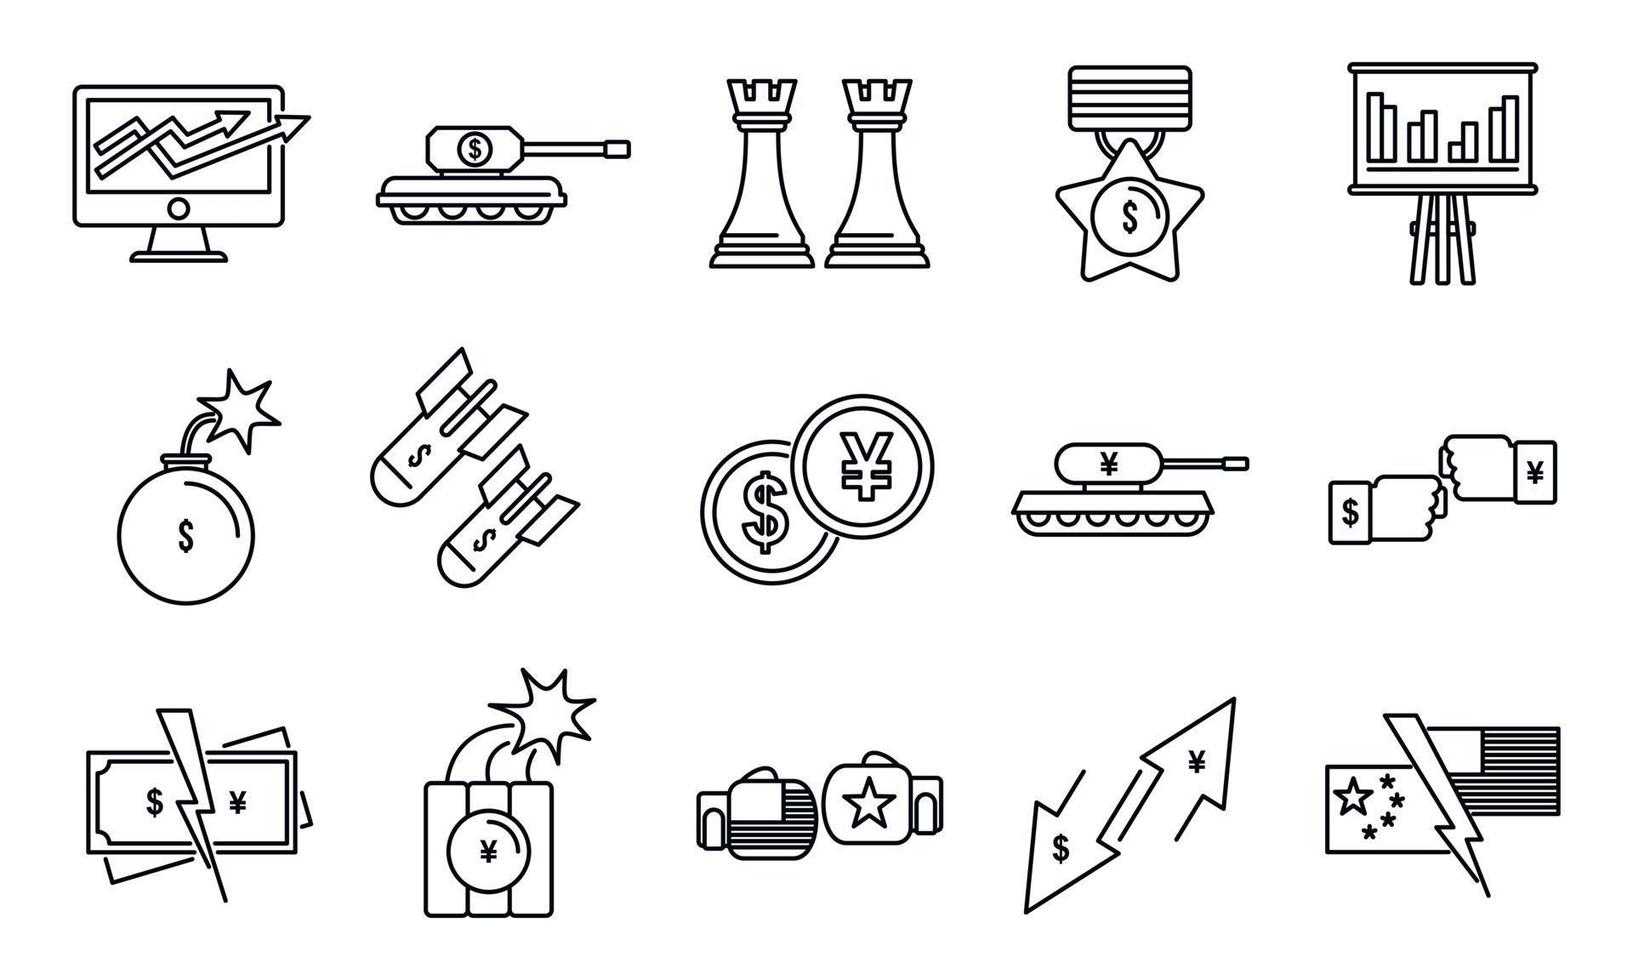 Economic trade war icons set, outline style vector